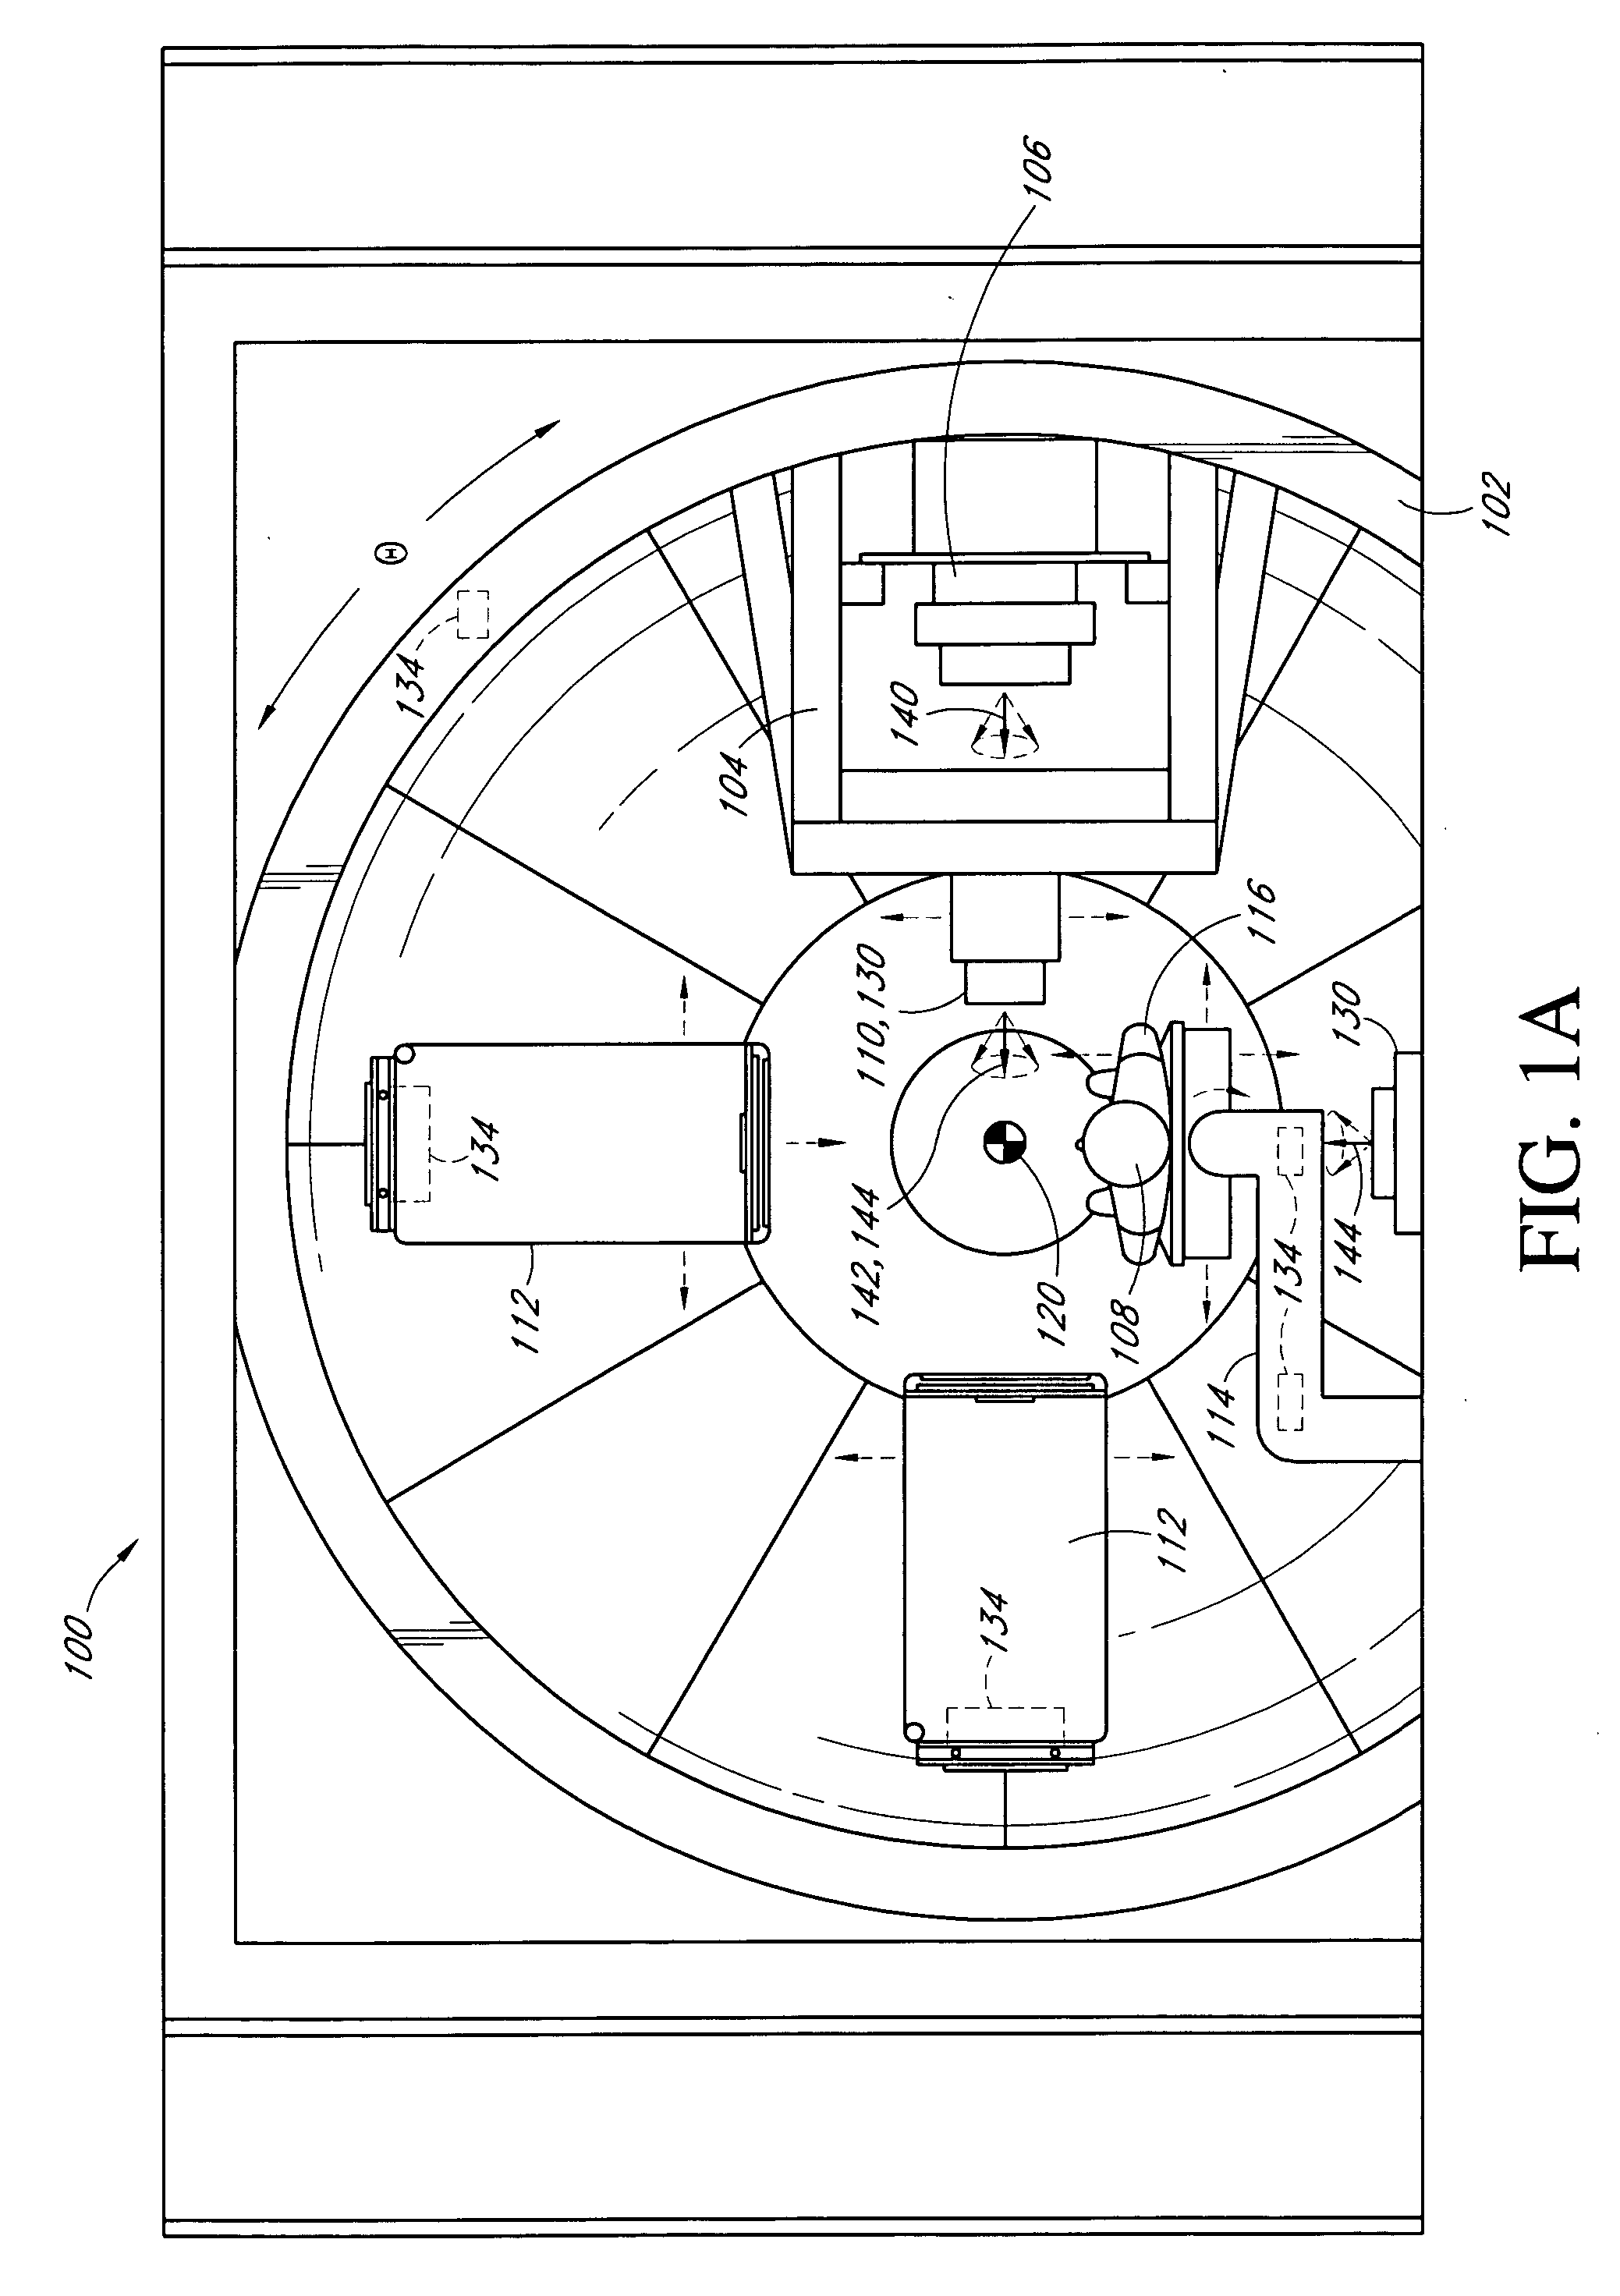 Patient alignment system with external measurement and object coordination for radiation therapy system